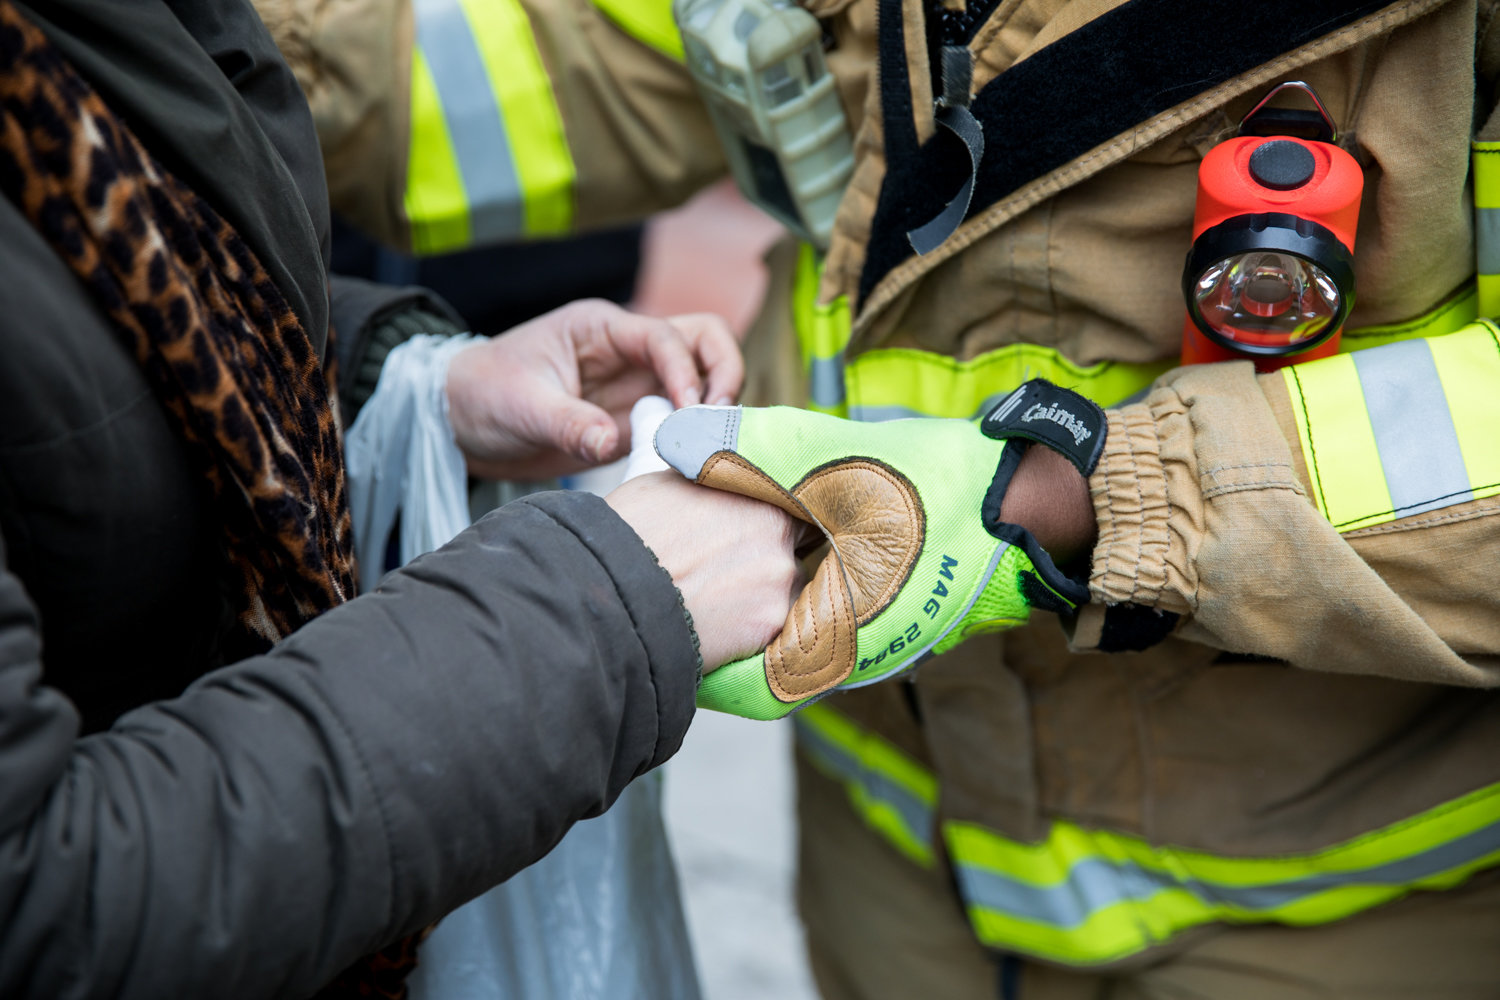 A resident of 215 W. 242nd St., where a one-alarm fire broke out Friday morning, gets her hand bandaged by emergency personnel. The fire injured 11 people, four critically and seven non-critically.